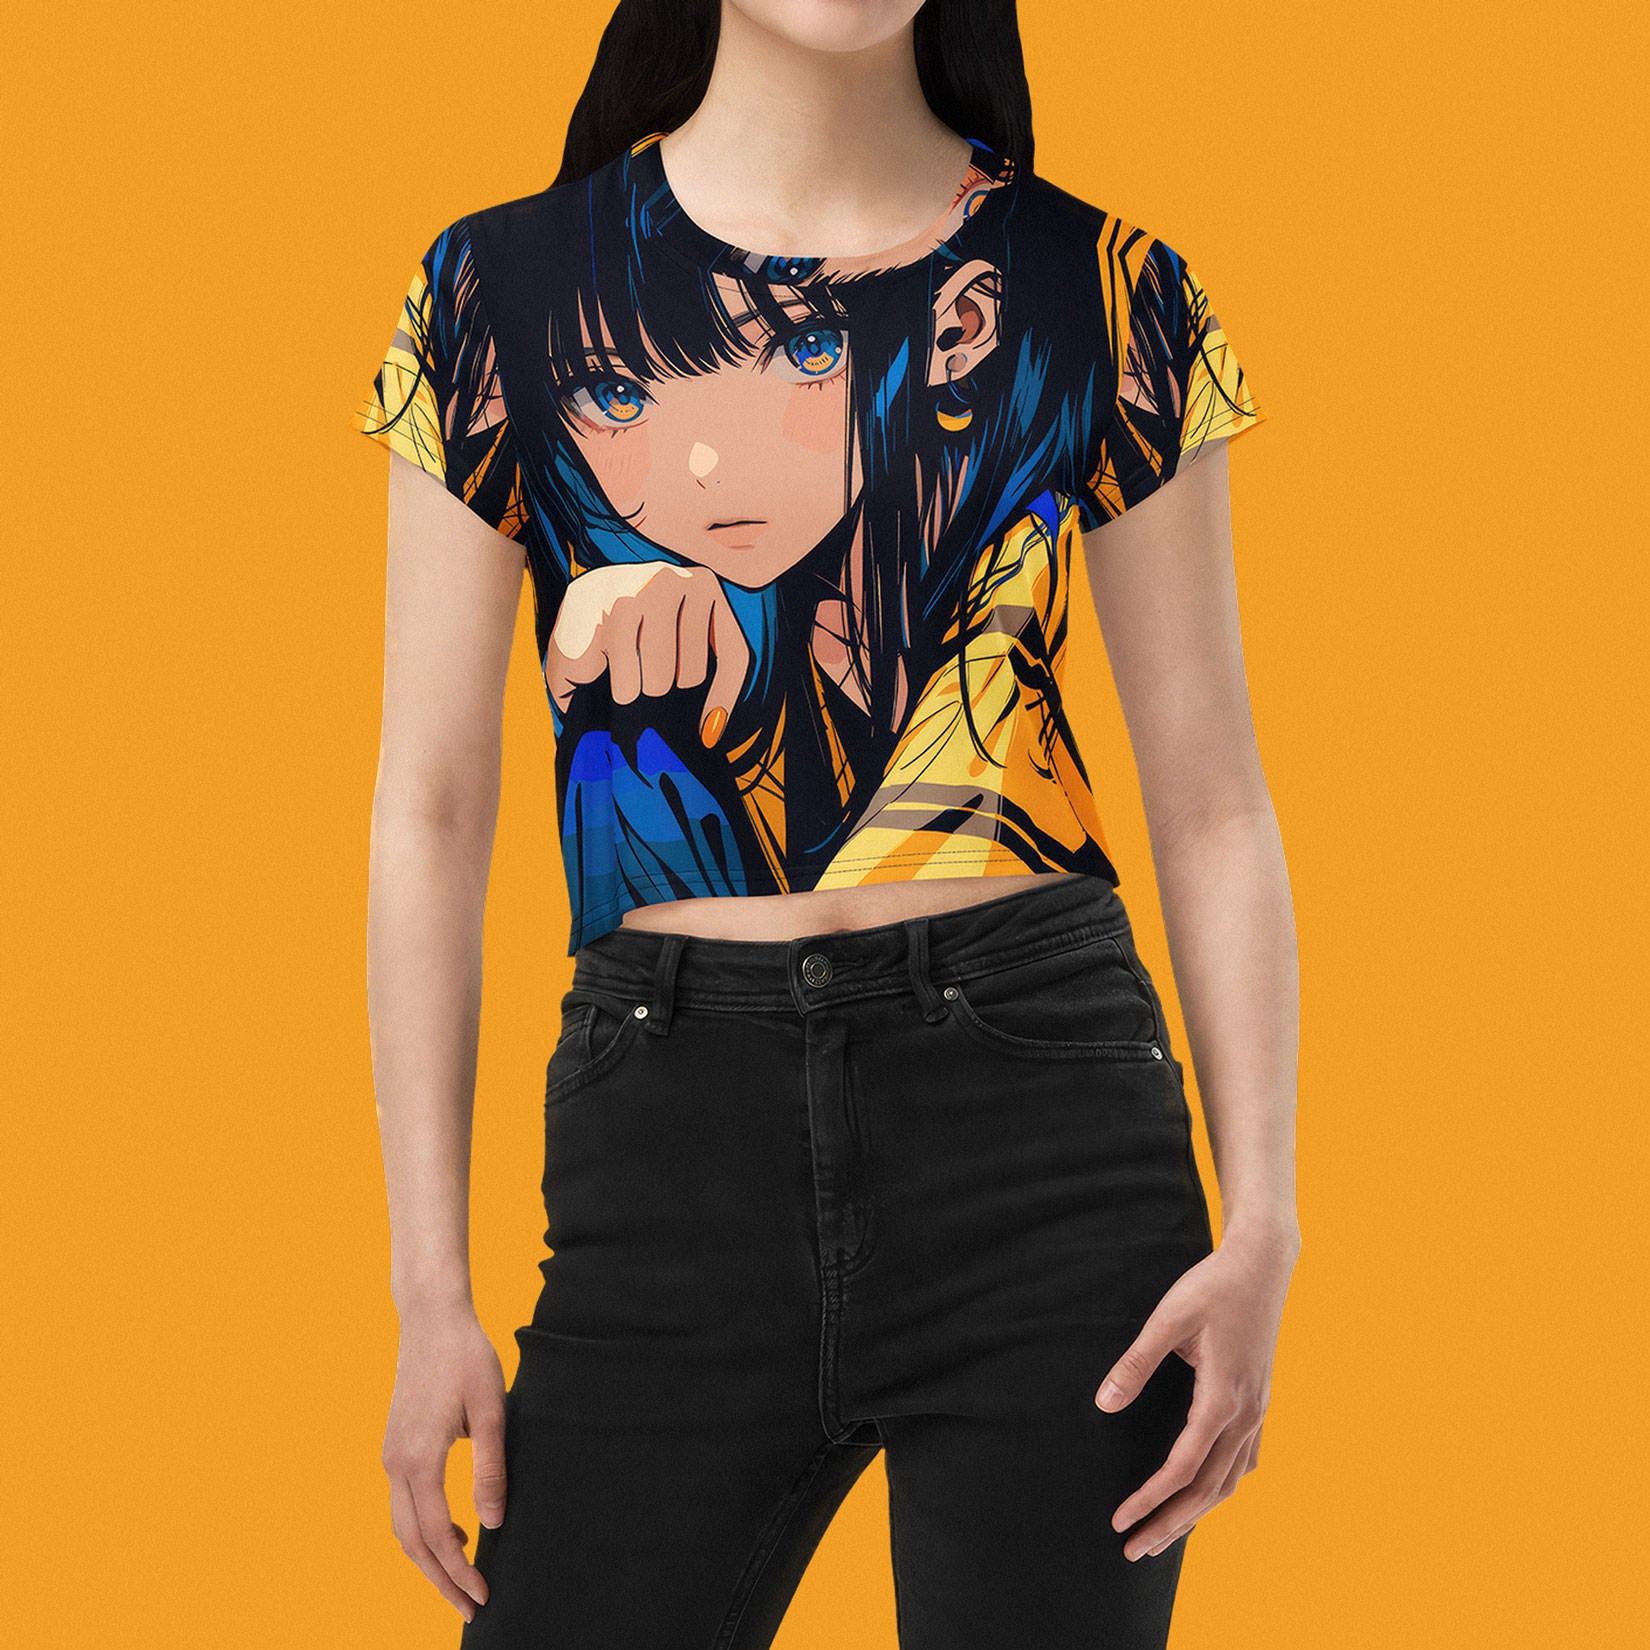 Tokyo Arkade is an experience designed for enthusiasts of Japanese lifestyle & culture. We are a clothing brand that combines the world of anime & video games with a retro style, precisely printed, cut & hand sewn.